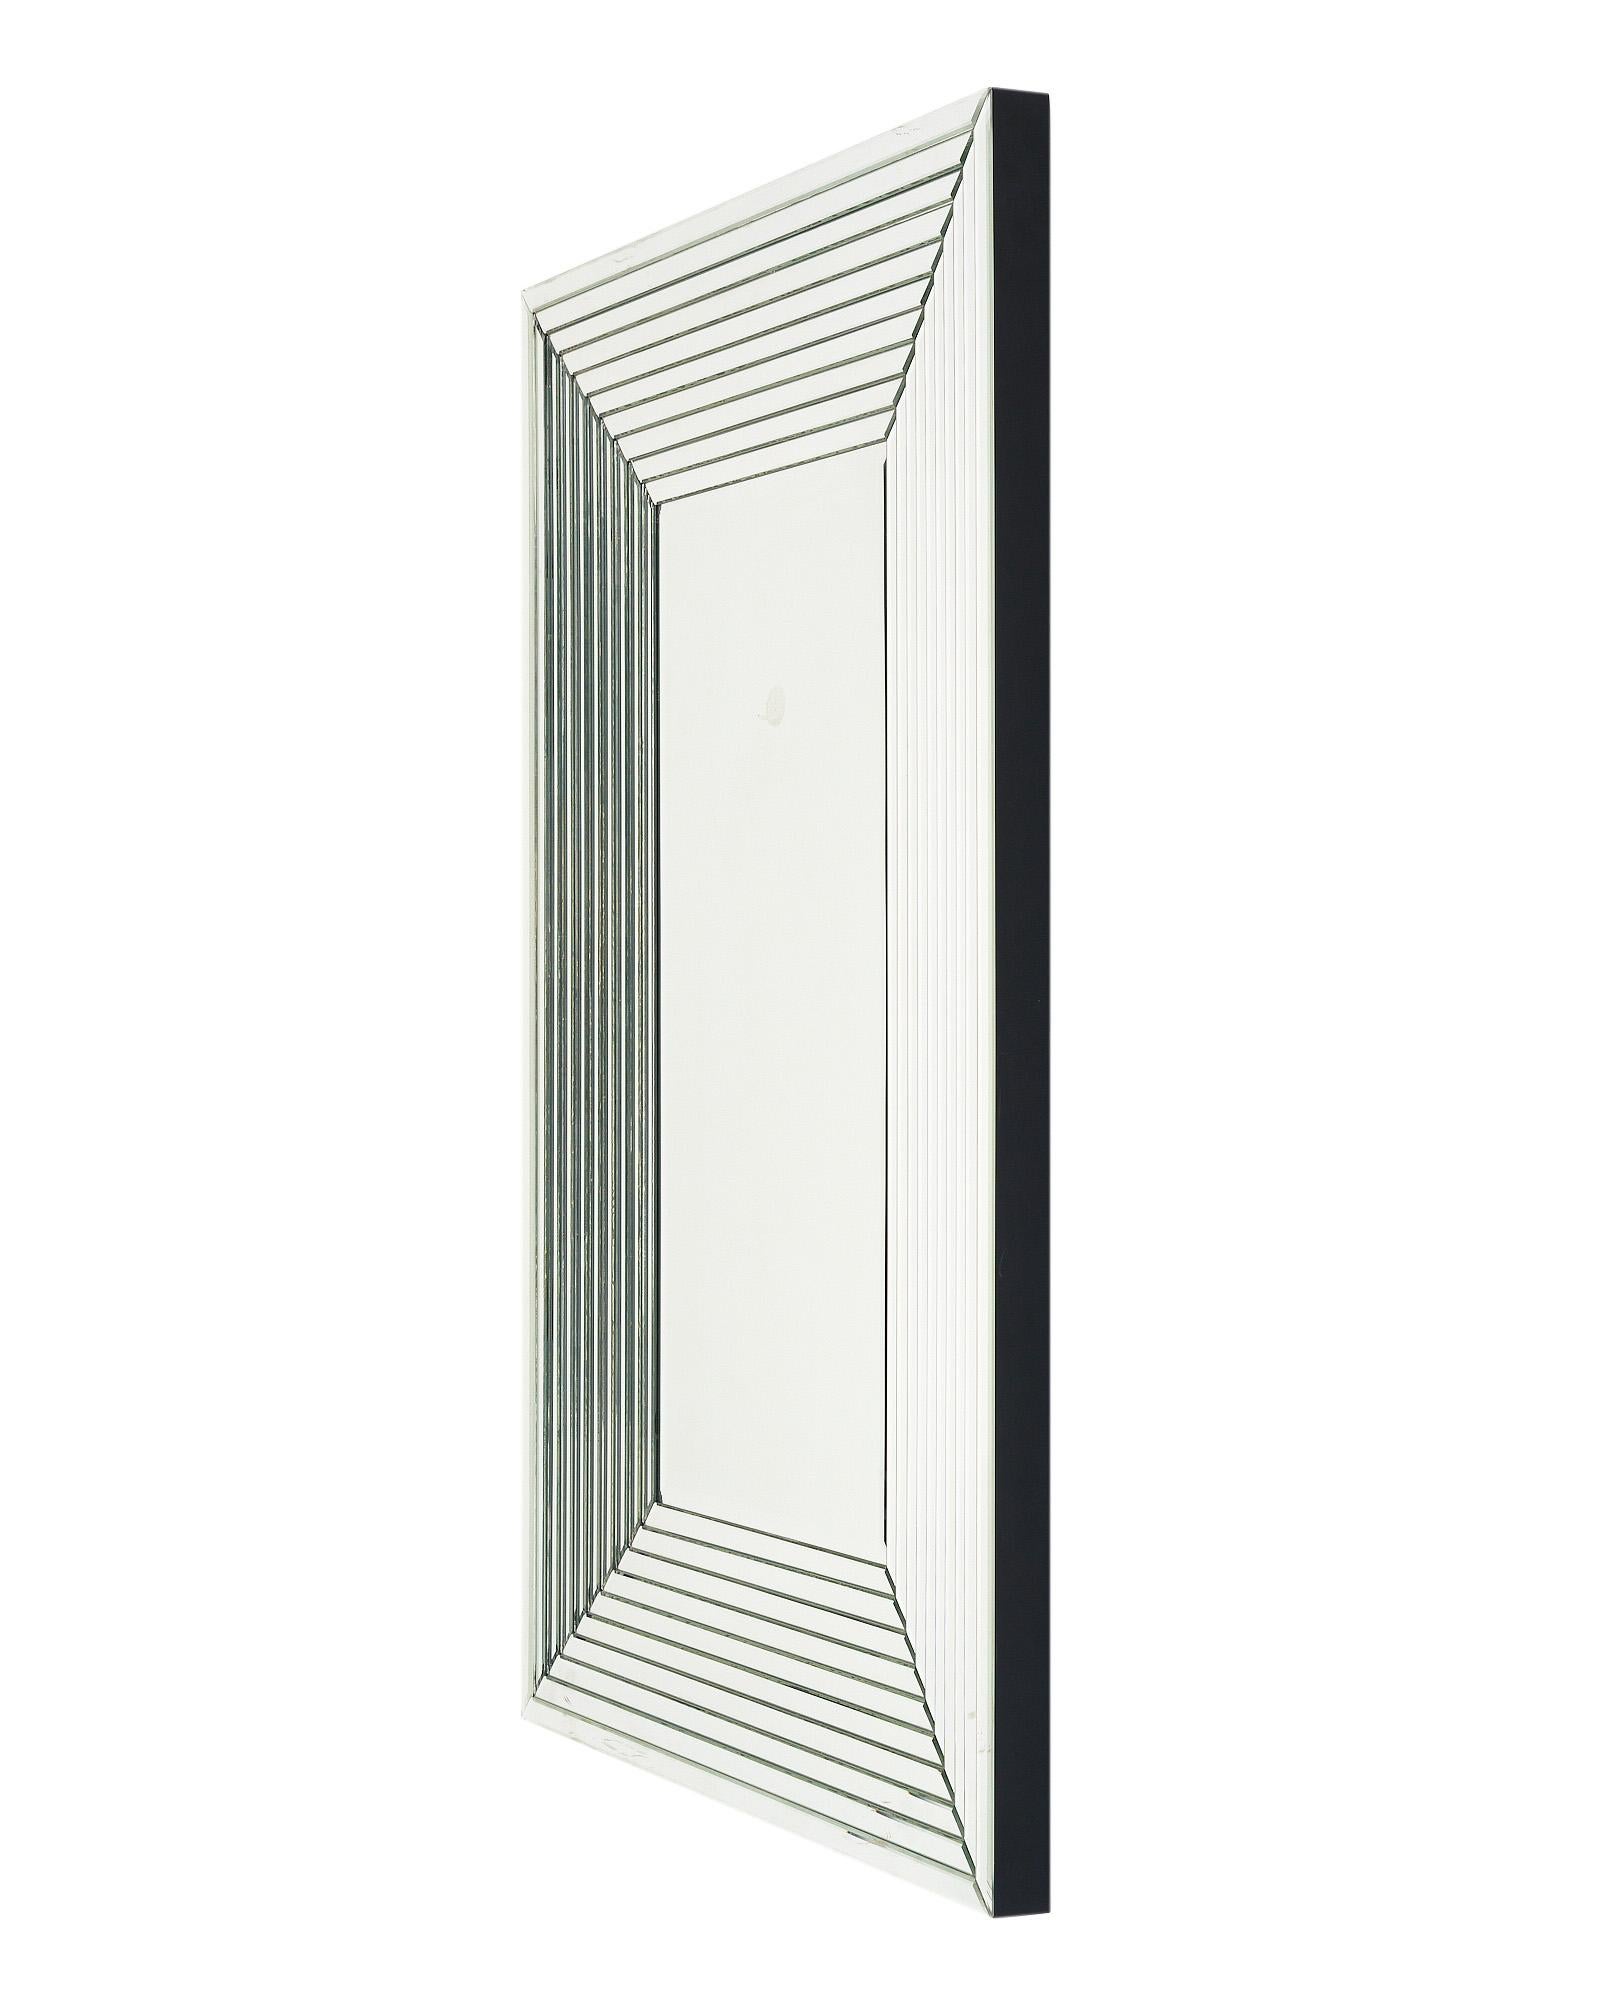 Large mirror from France in the Art Deco style. This piece has a wood structure with layered mirrors creating a Deco frame to the central beveled mirror. It can be hung vertically or horizontally and has a strong presence in any space.